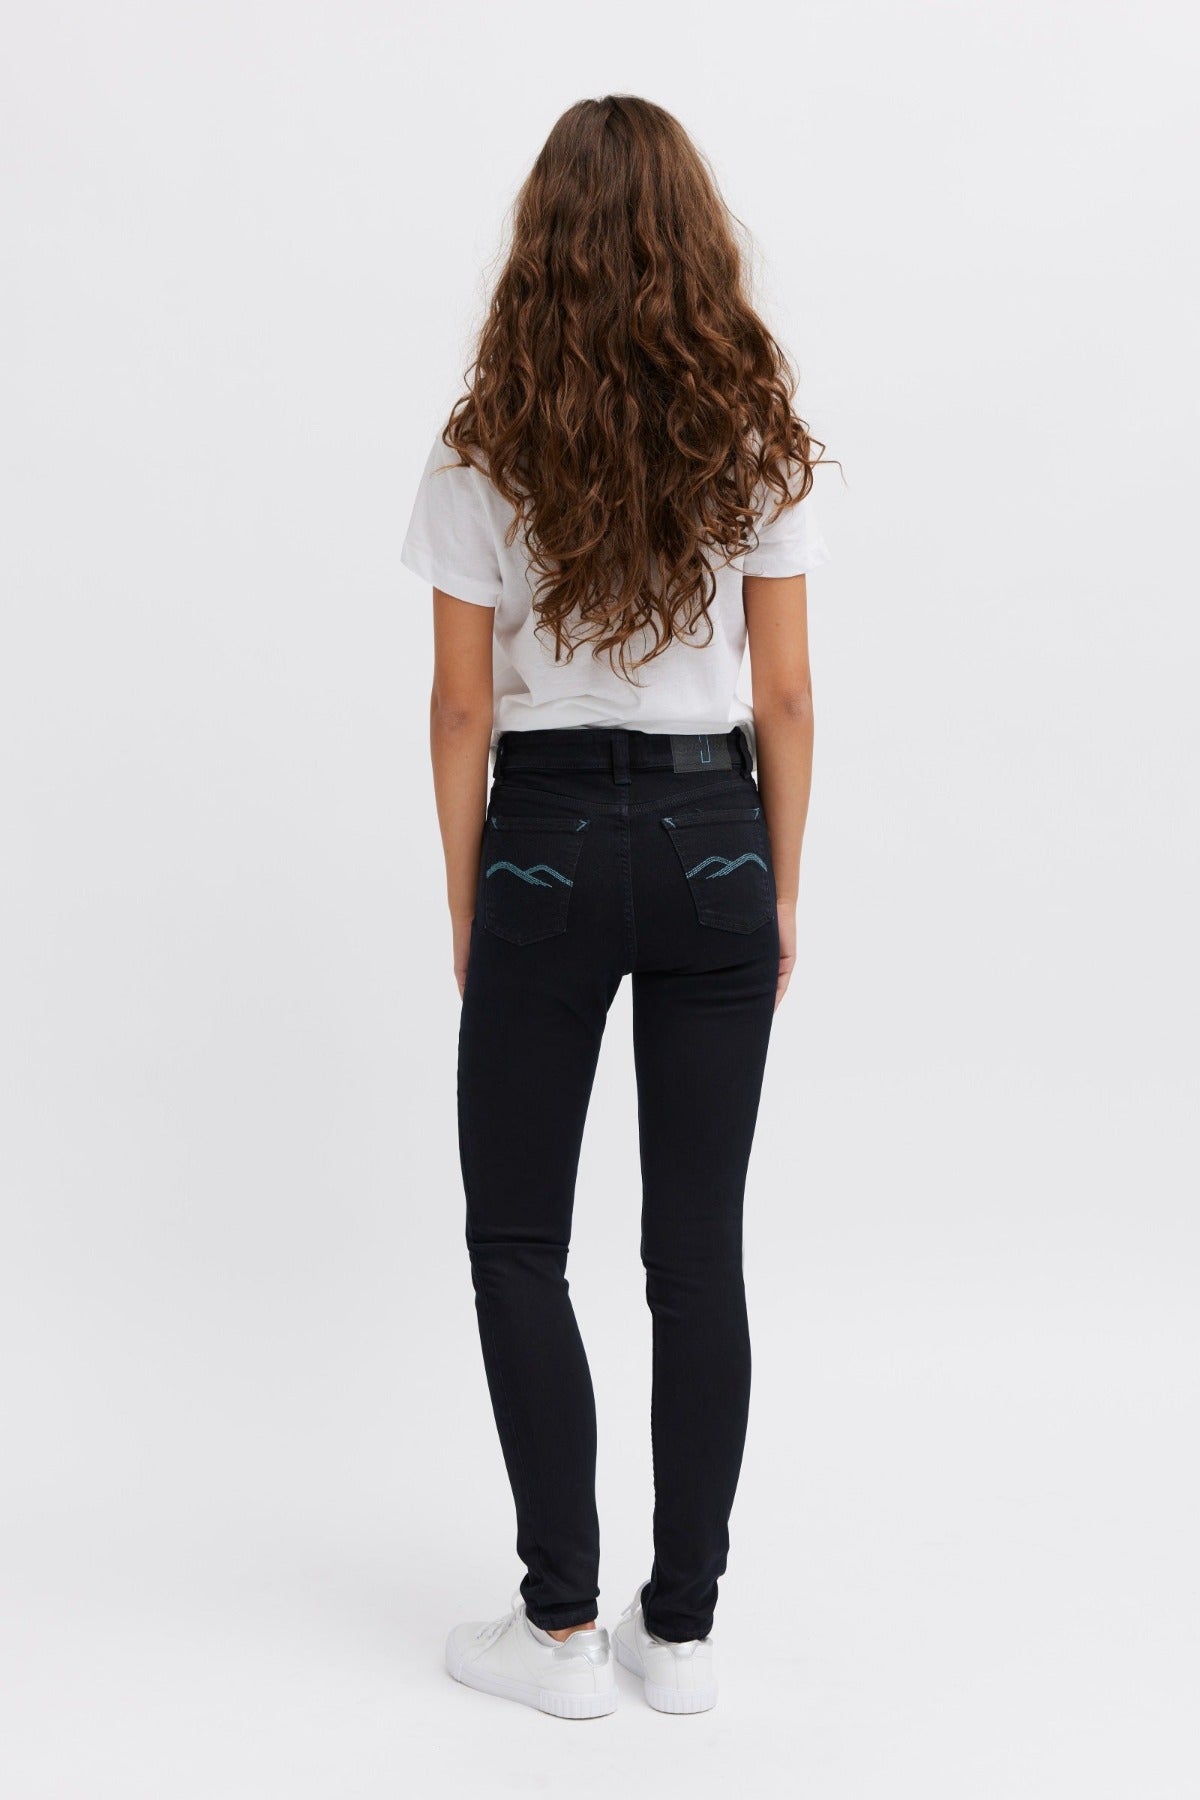 Black jeans with design detail